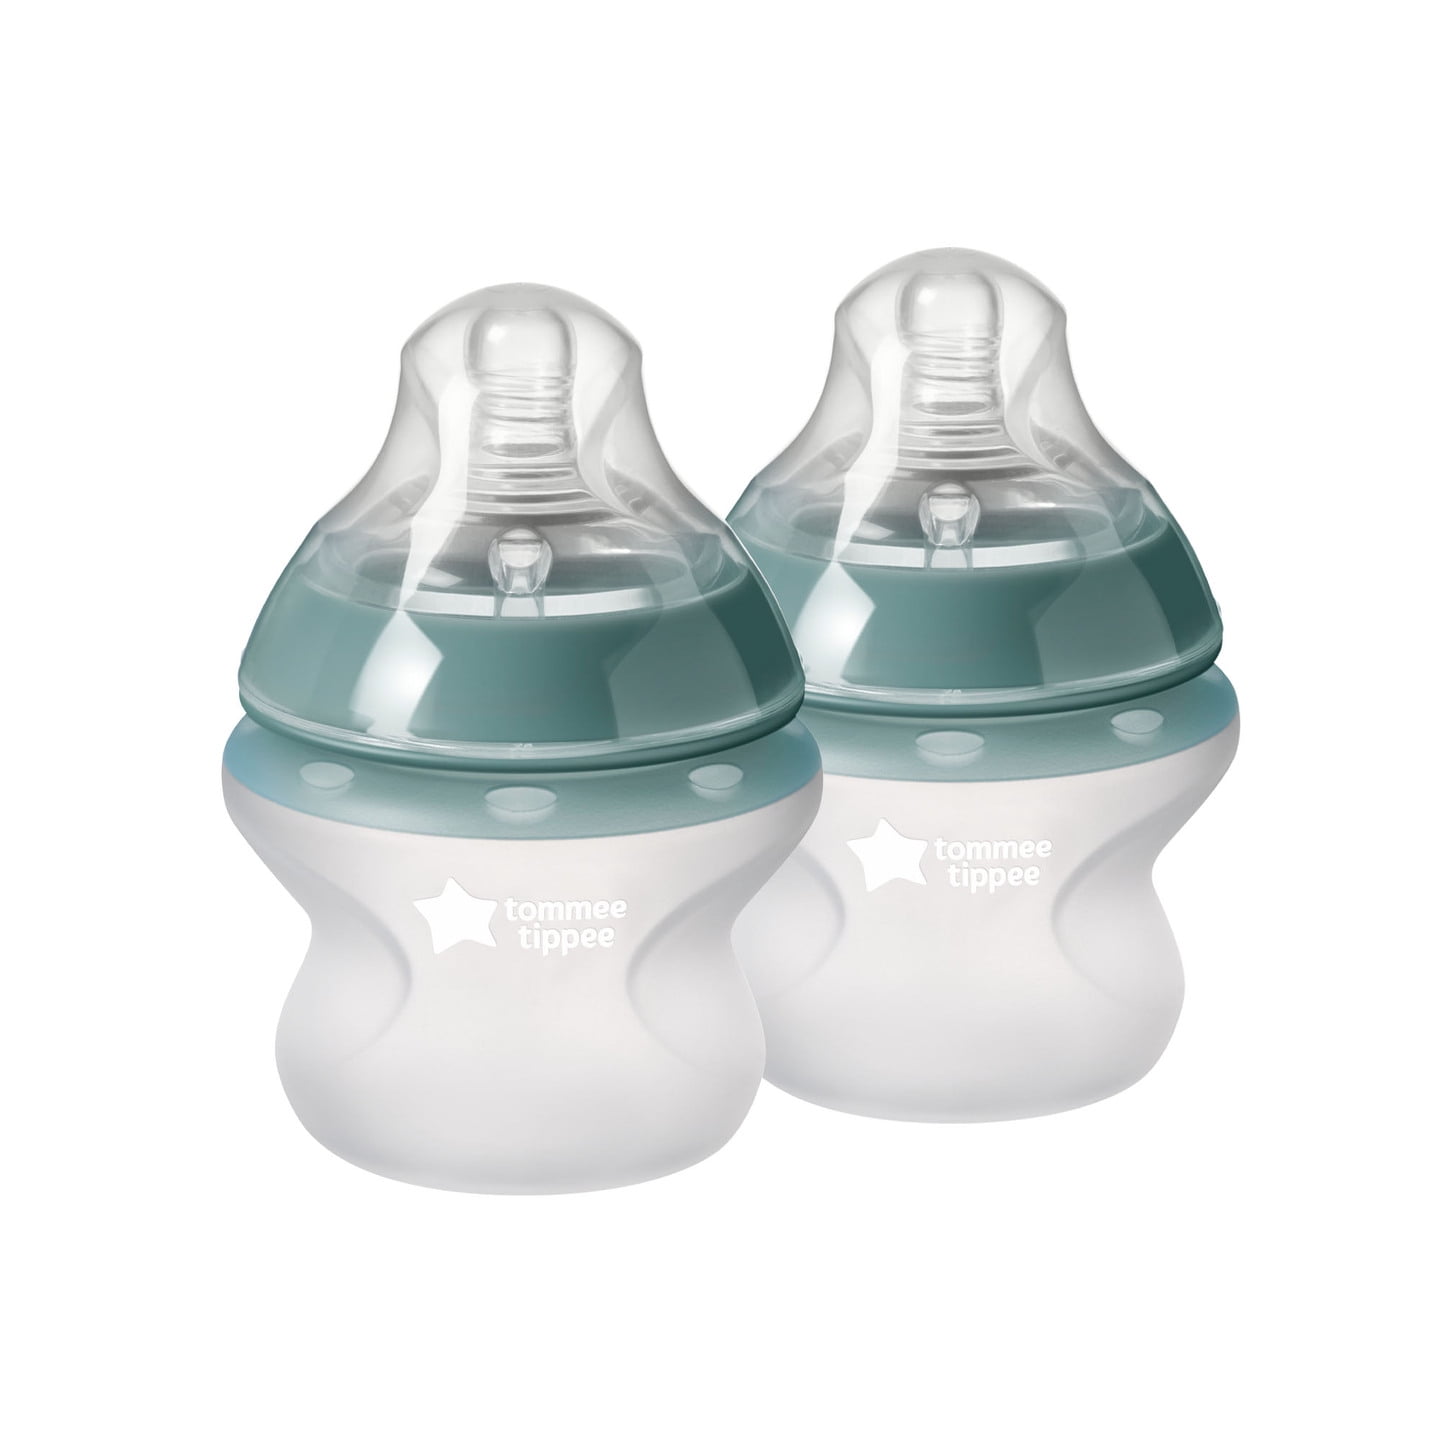 Tommee Tippee Closer to Nature Silicone Baby Bottle - 5oz - 2 Pack